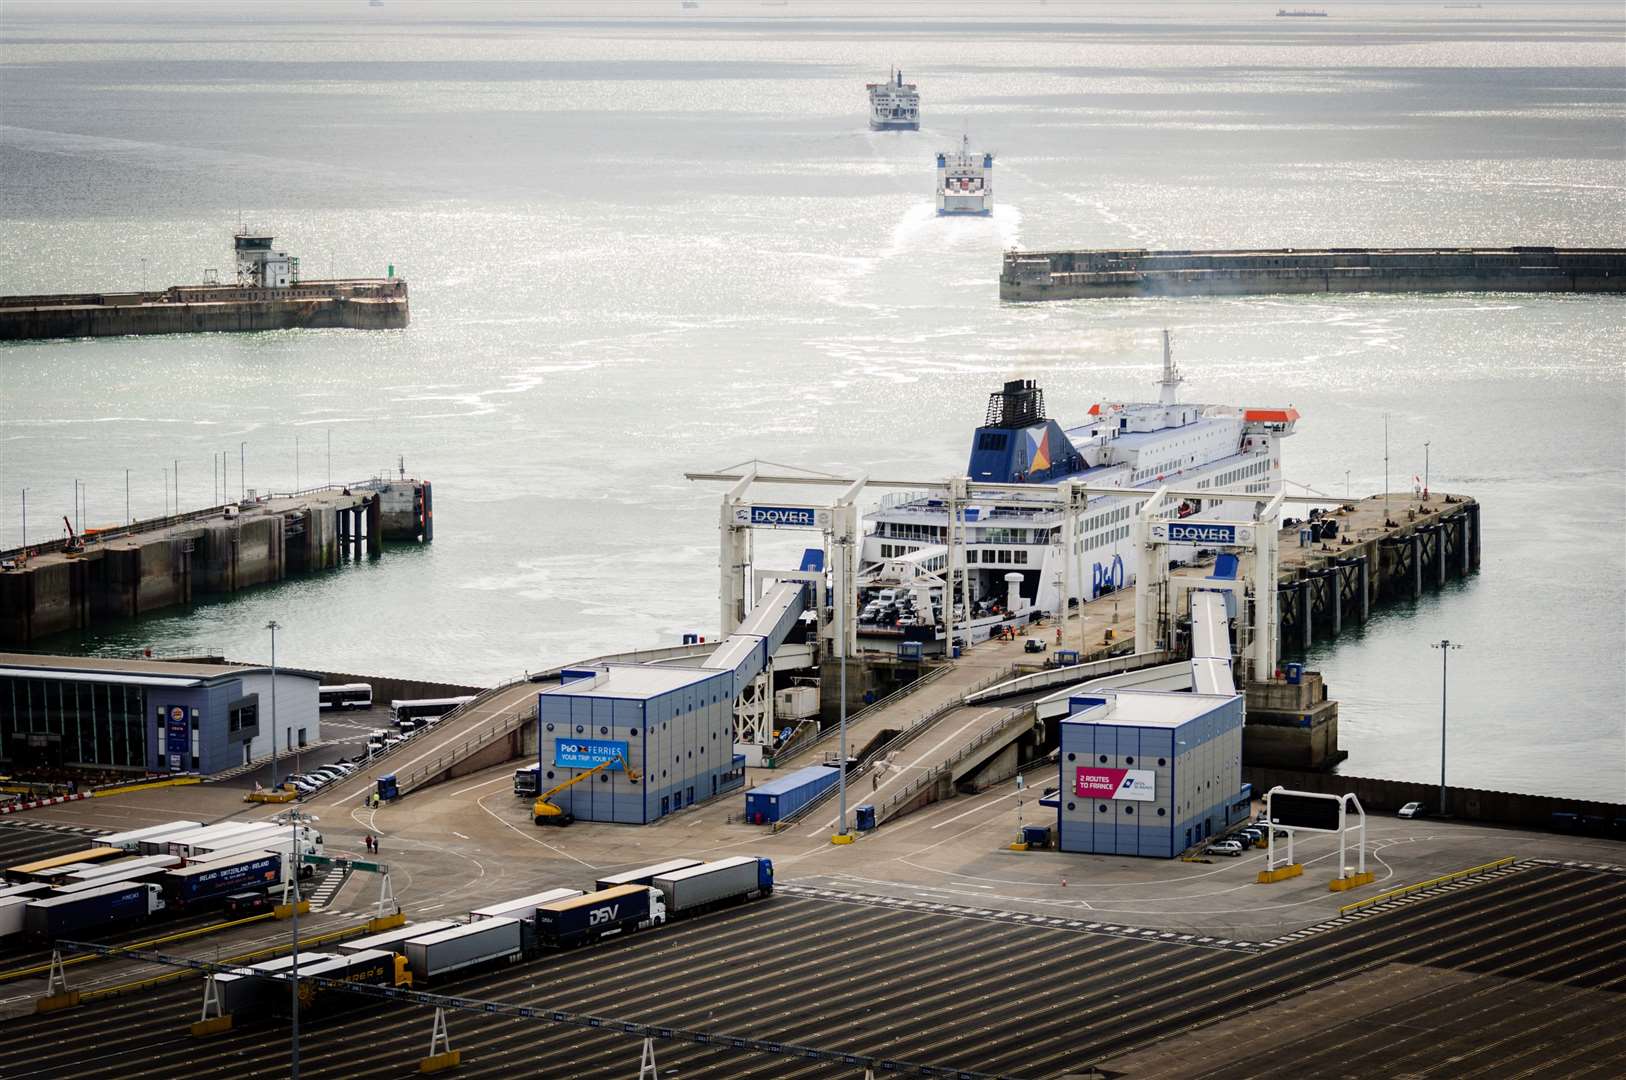 P&O says there are six-and-a-half hour waits for coaches arriving at Calais to board ferries due to the Border Force strike action